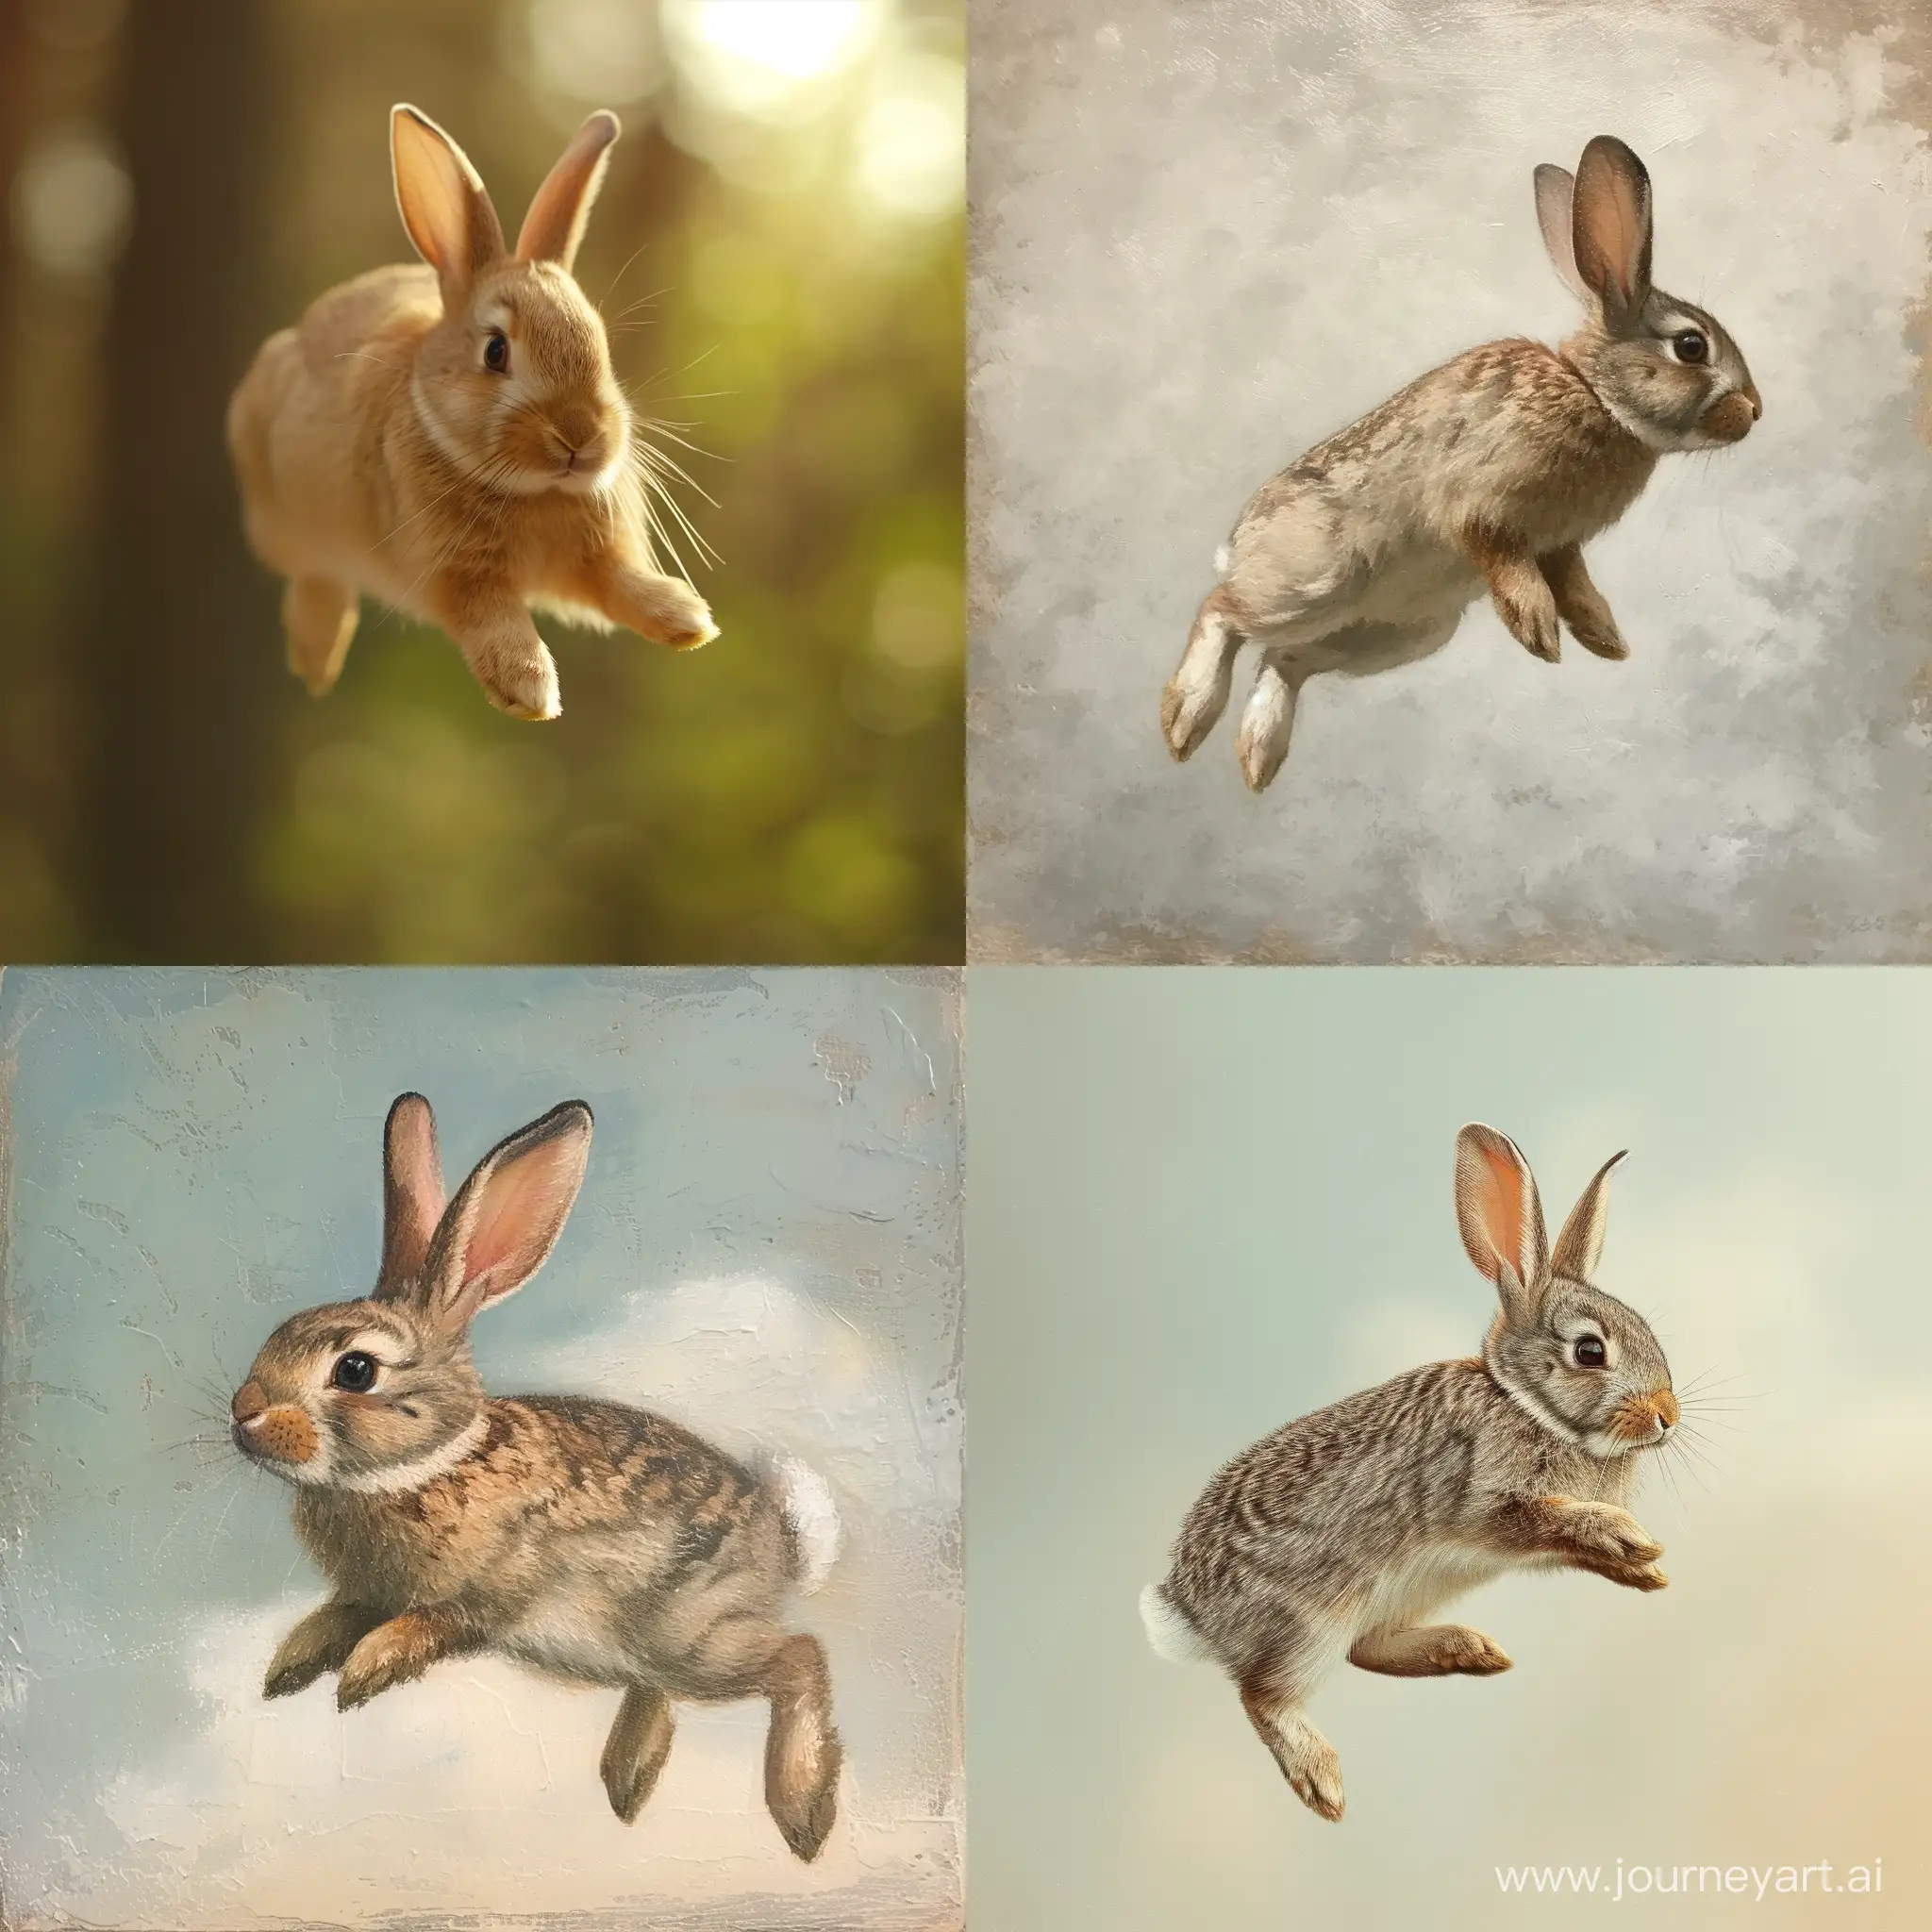 Graceful-Flying-Rabbit-in-Serene-Ambiance